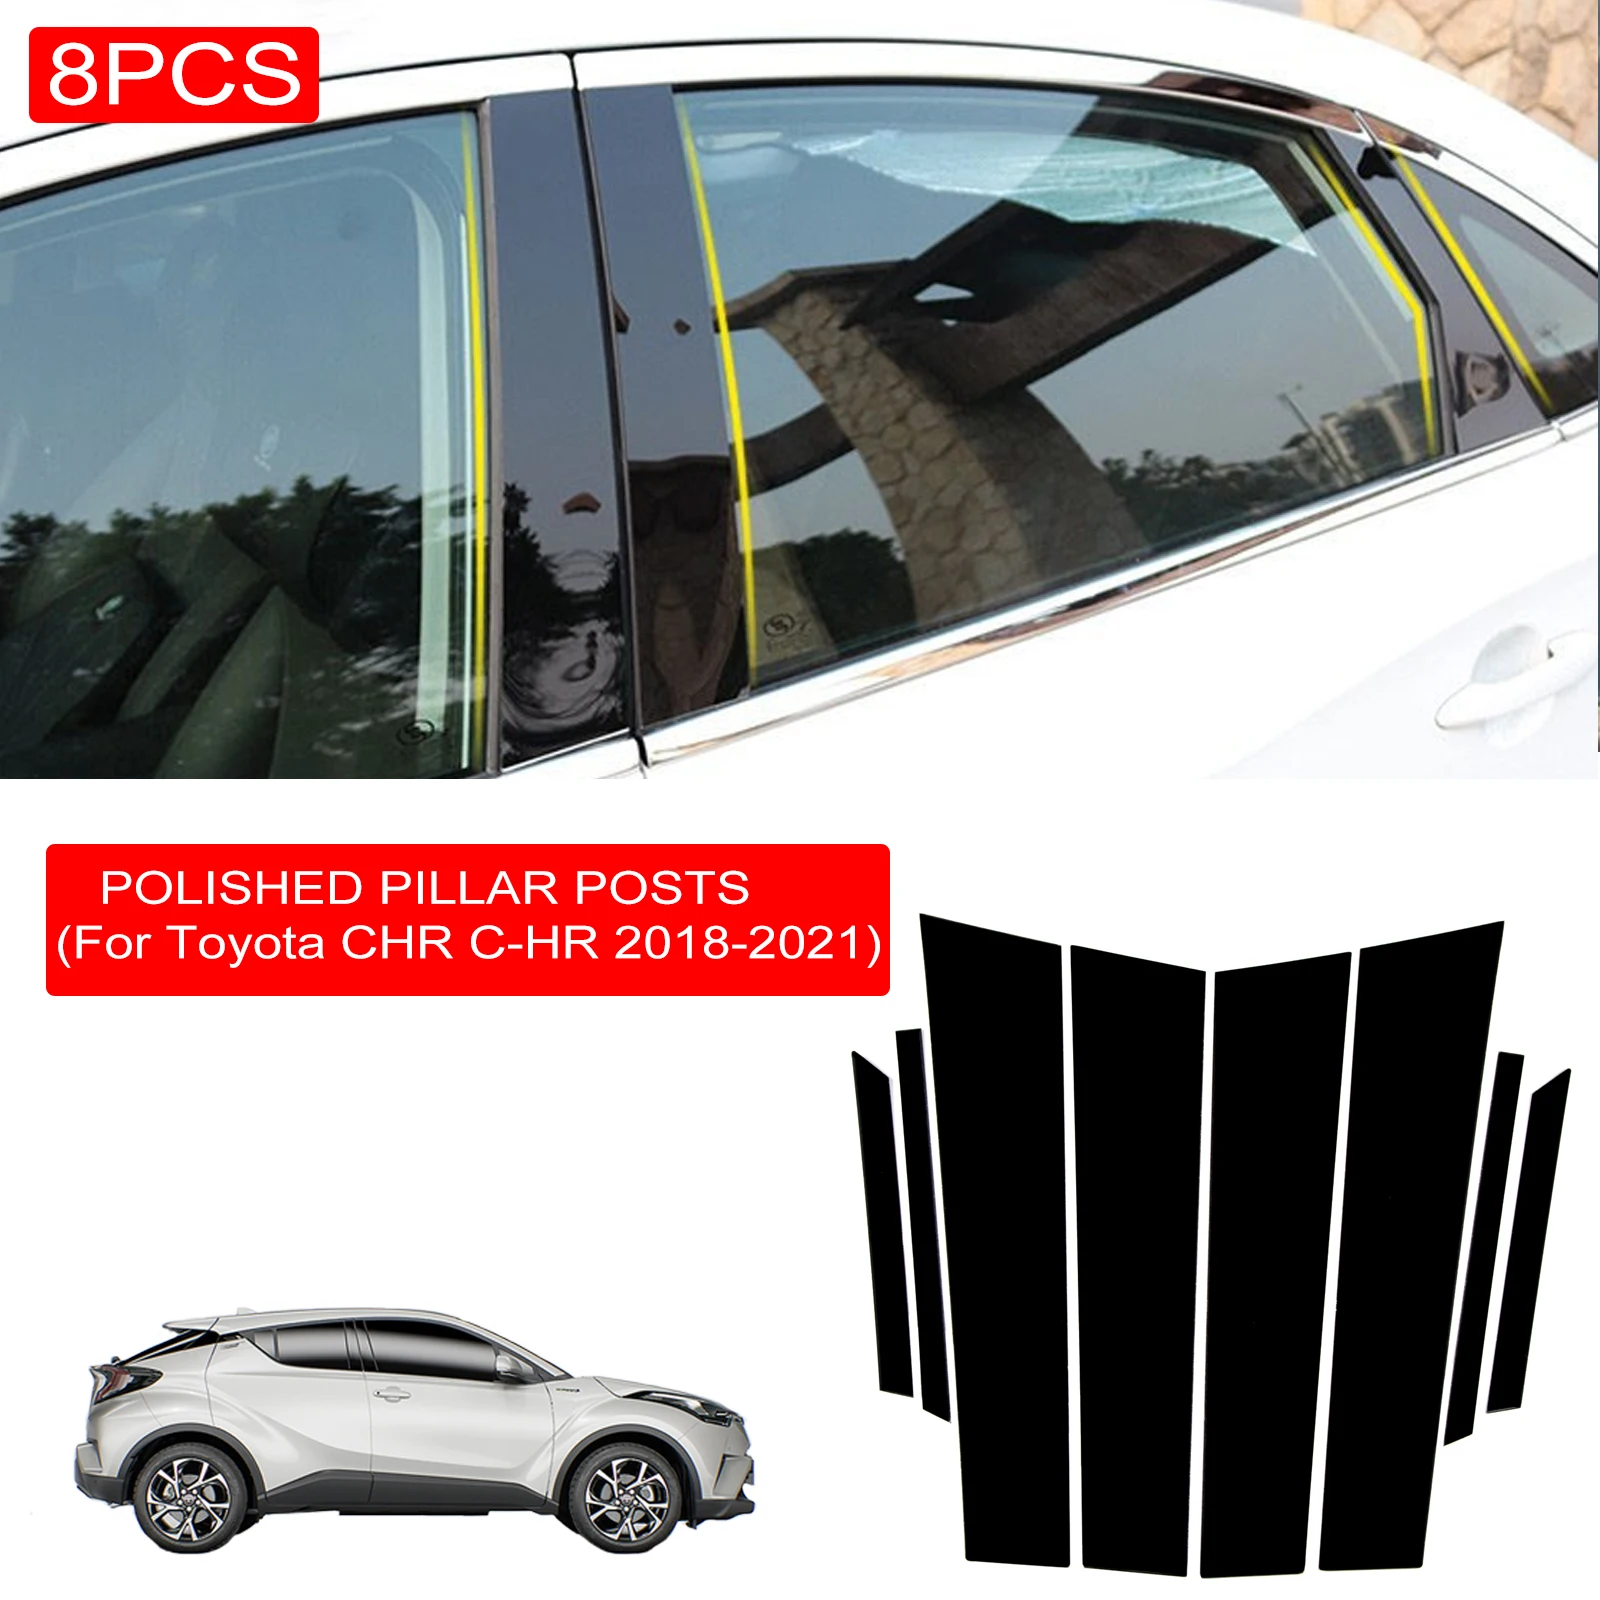 

8PCS Polished Pillar Posts Fit For Toyota CHR C-HR 2018-2021 Car Window Trim Cover BC Column Sticker Styling Accessories